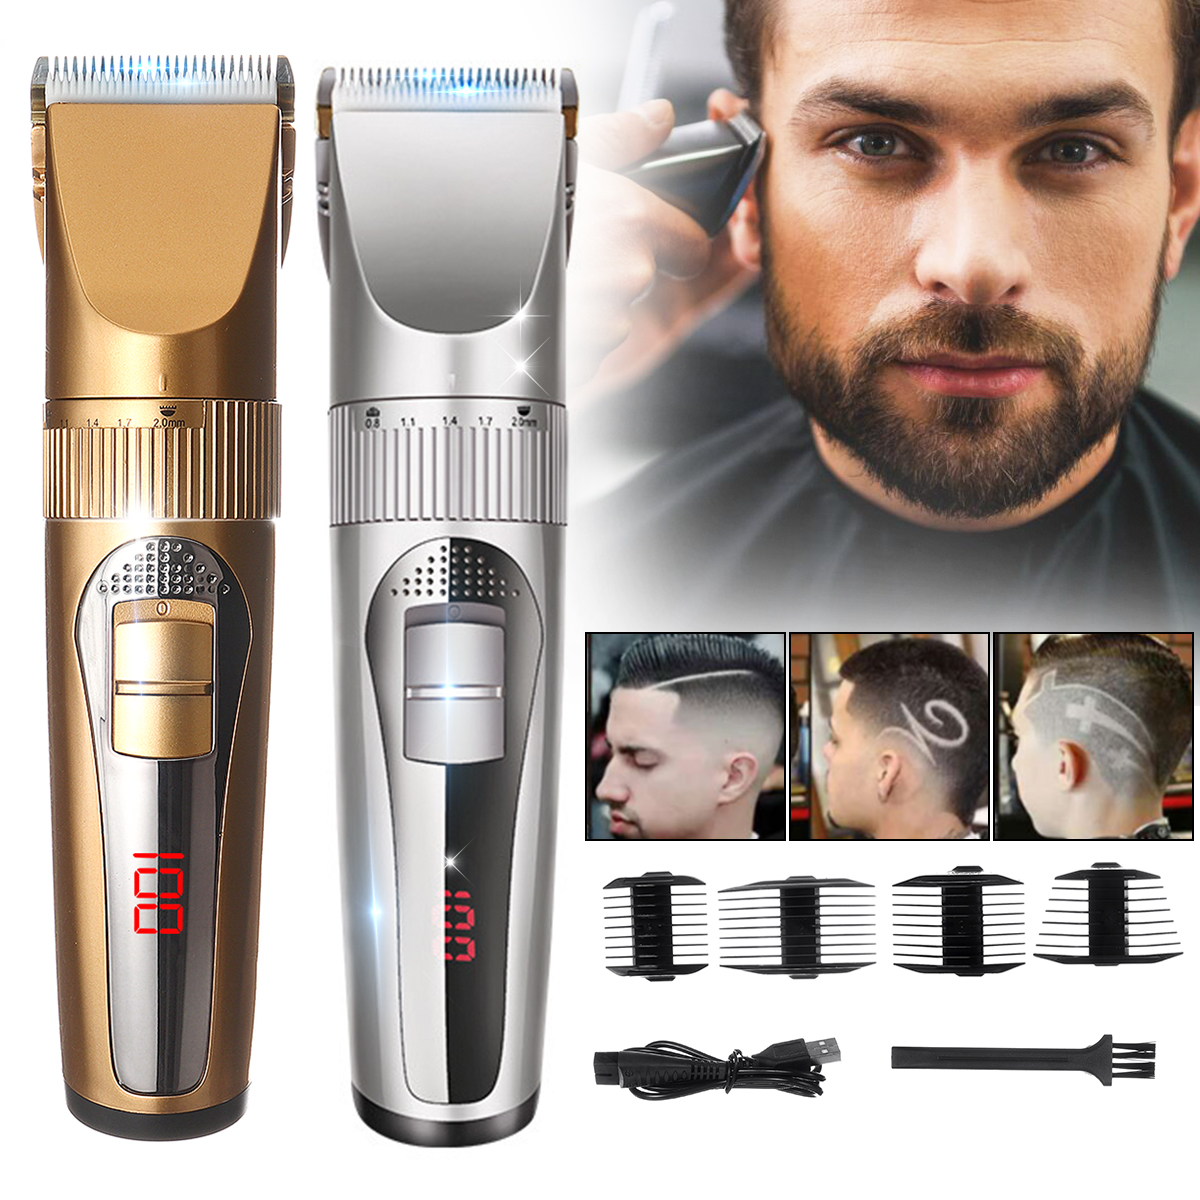 Men's Electric Digital display Hair Clipper USB Charging Hair Shaver W/ 4 Limit Combs